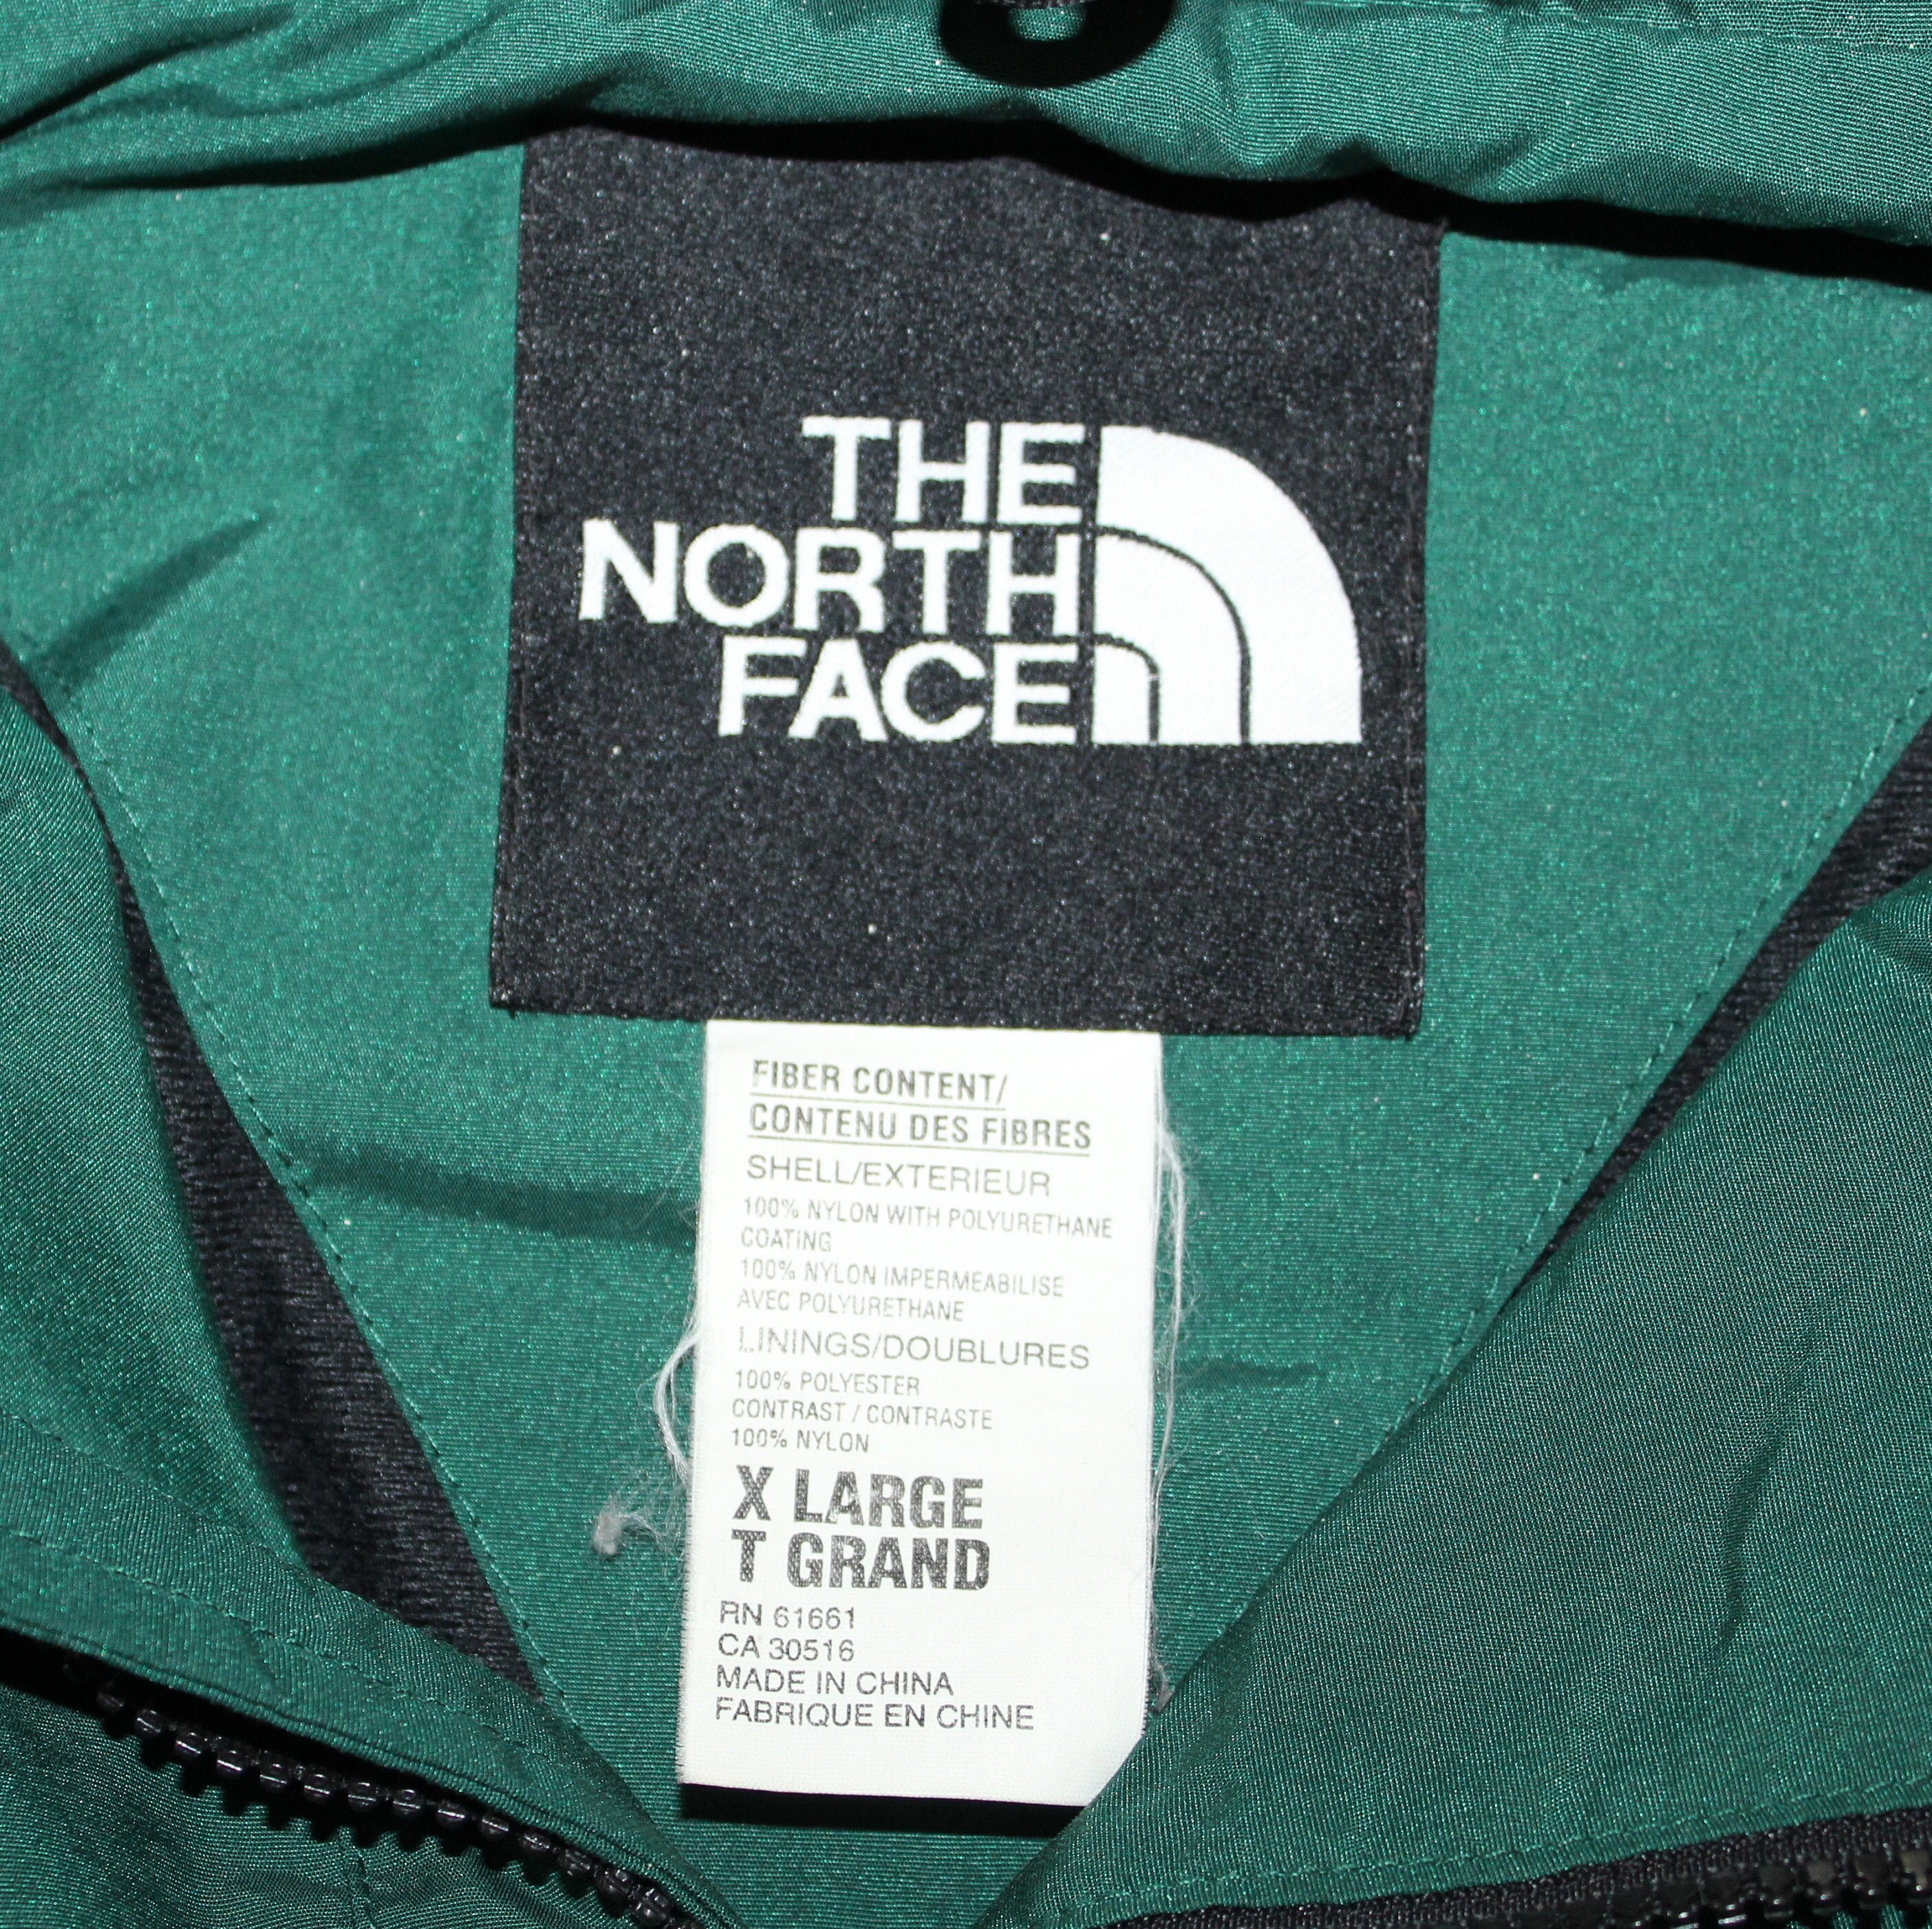 Vintage 90s Clothing the North Face Gore Tex Men Size XL / - Etsy